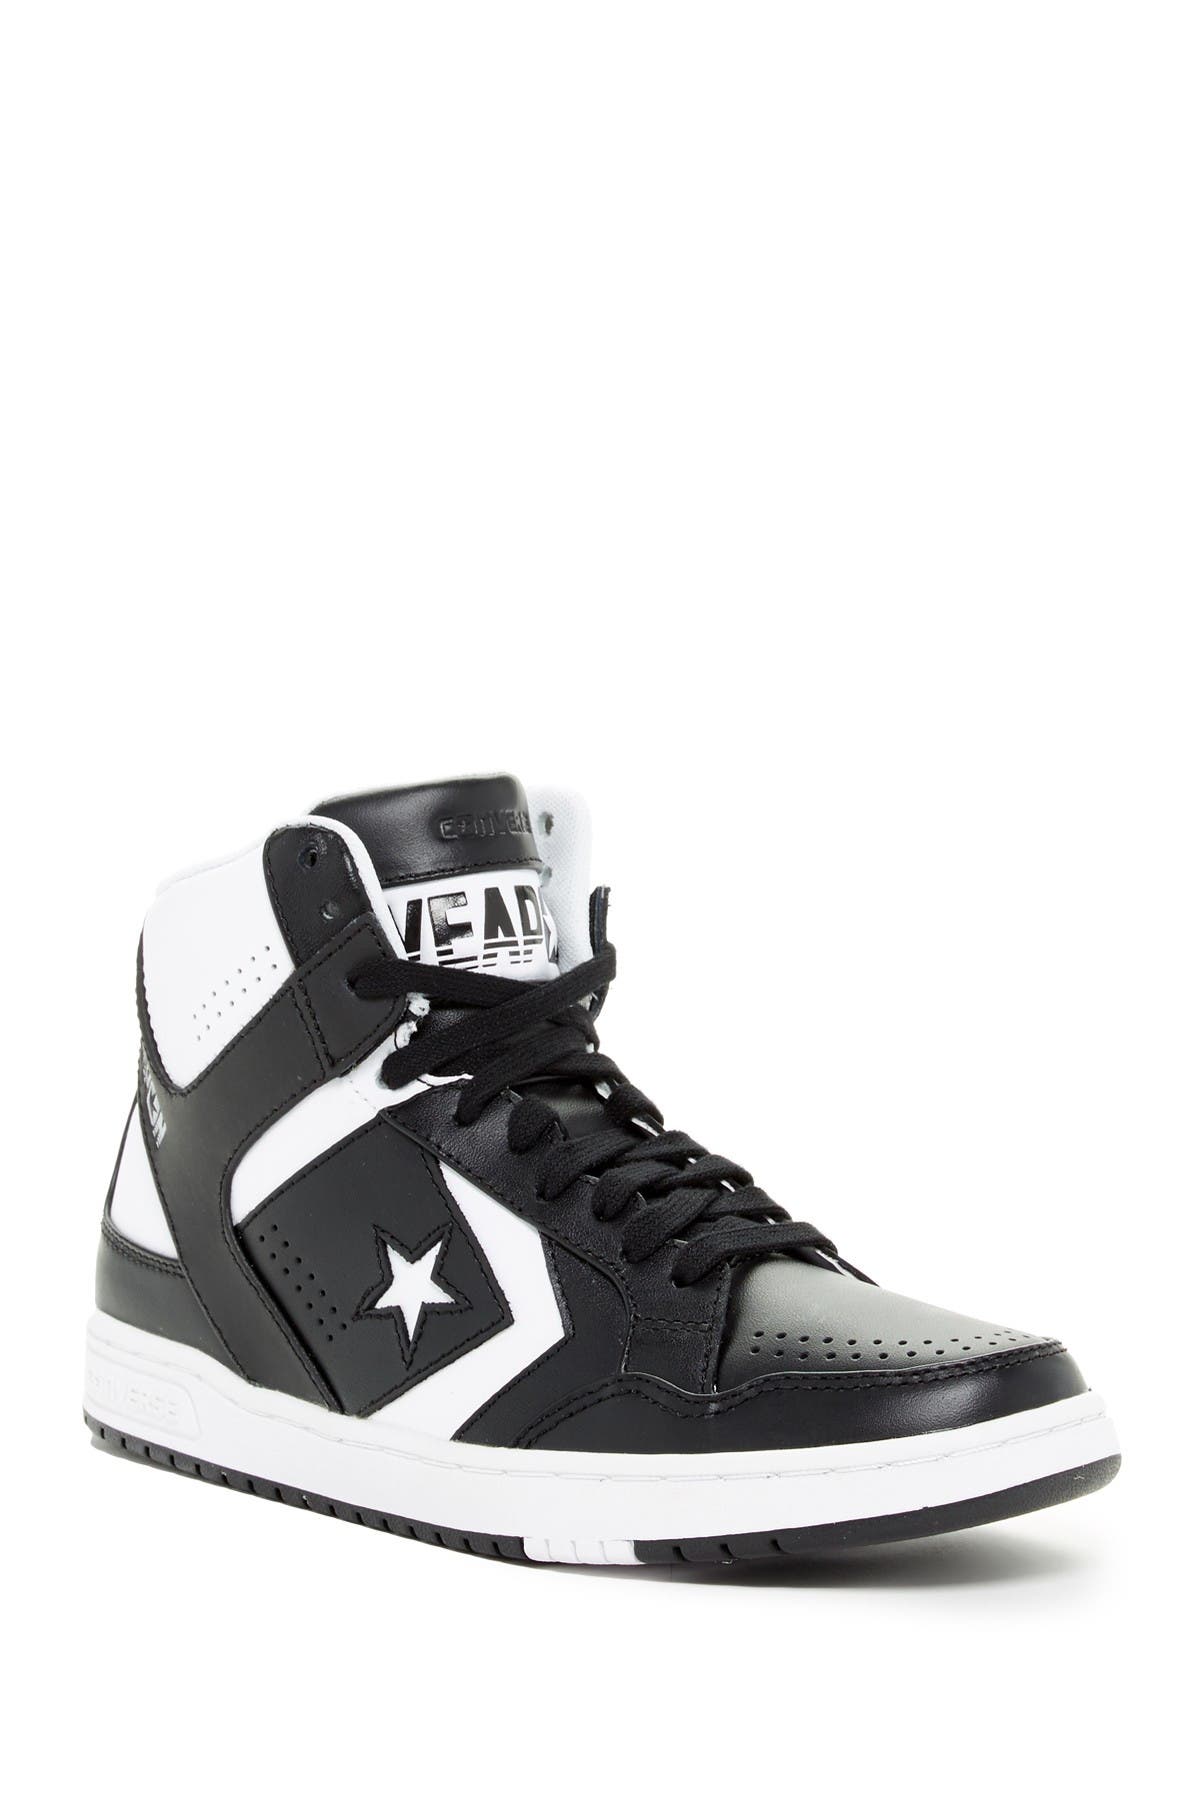 converse weapon size 14